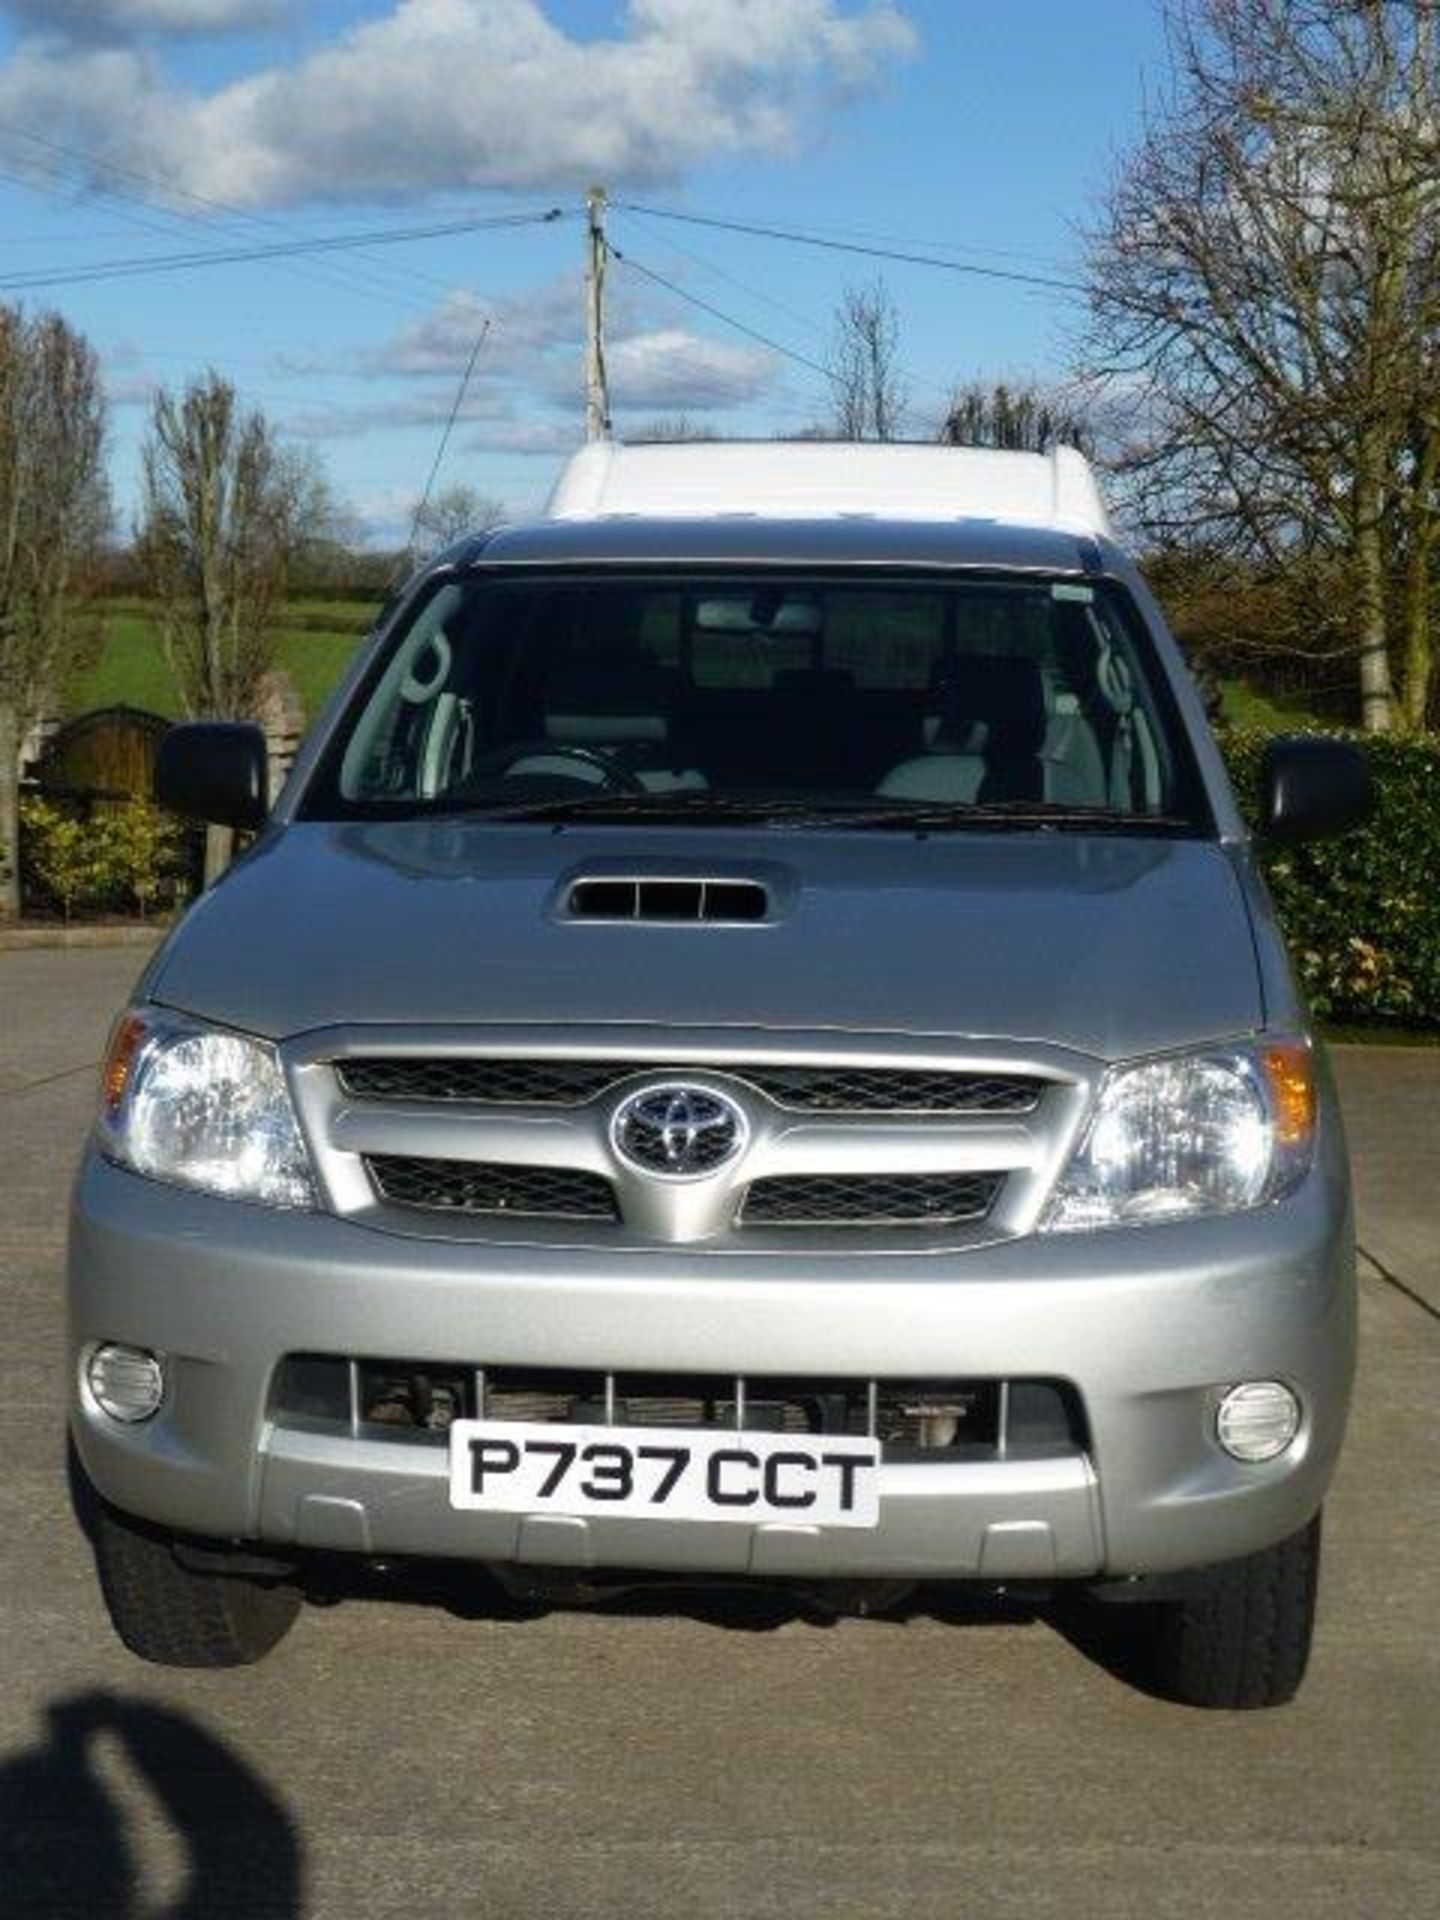 2008 Toyota Hi-lux 2.5 HL2 Double cab 4 x 4 - Image 3 of 5